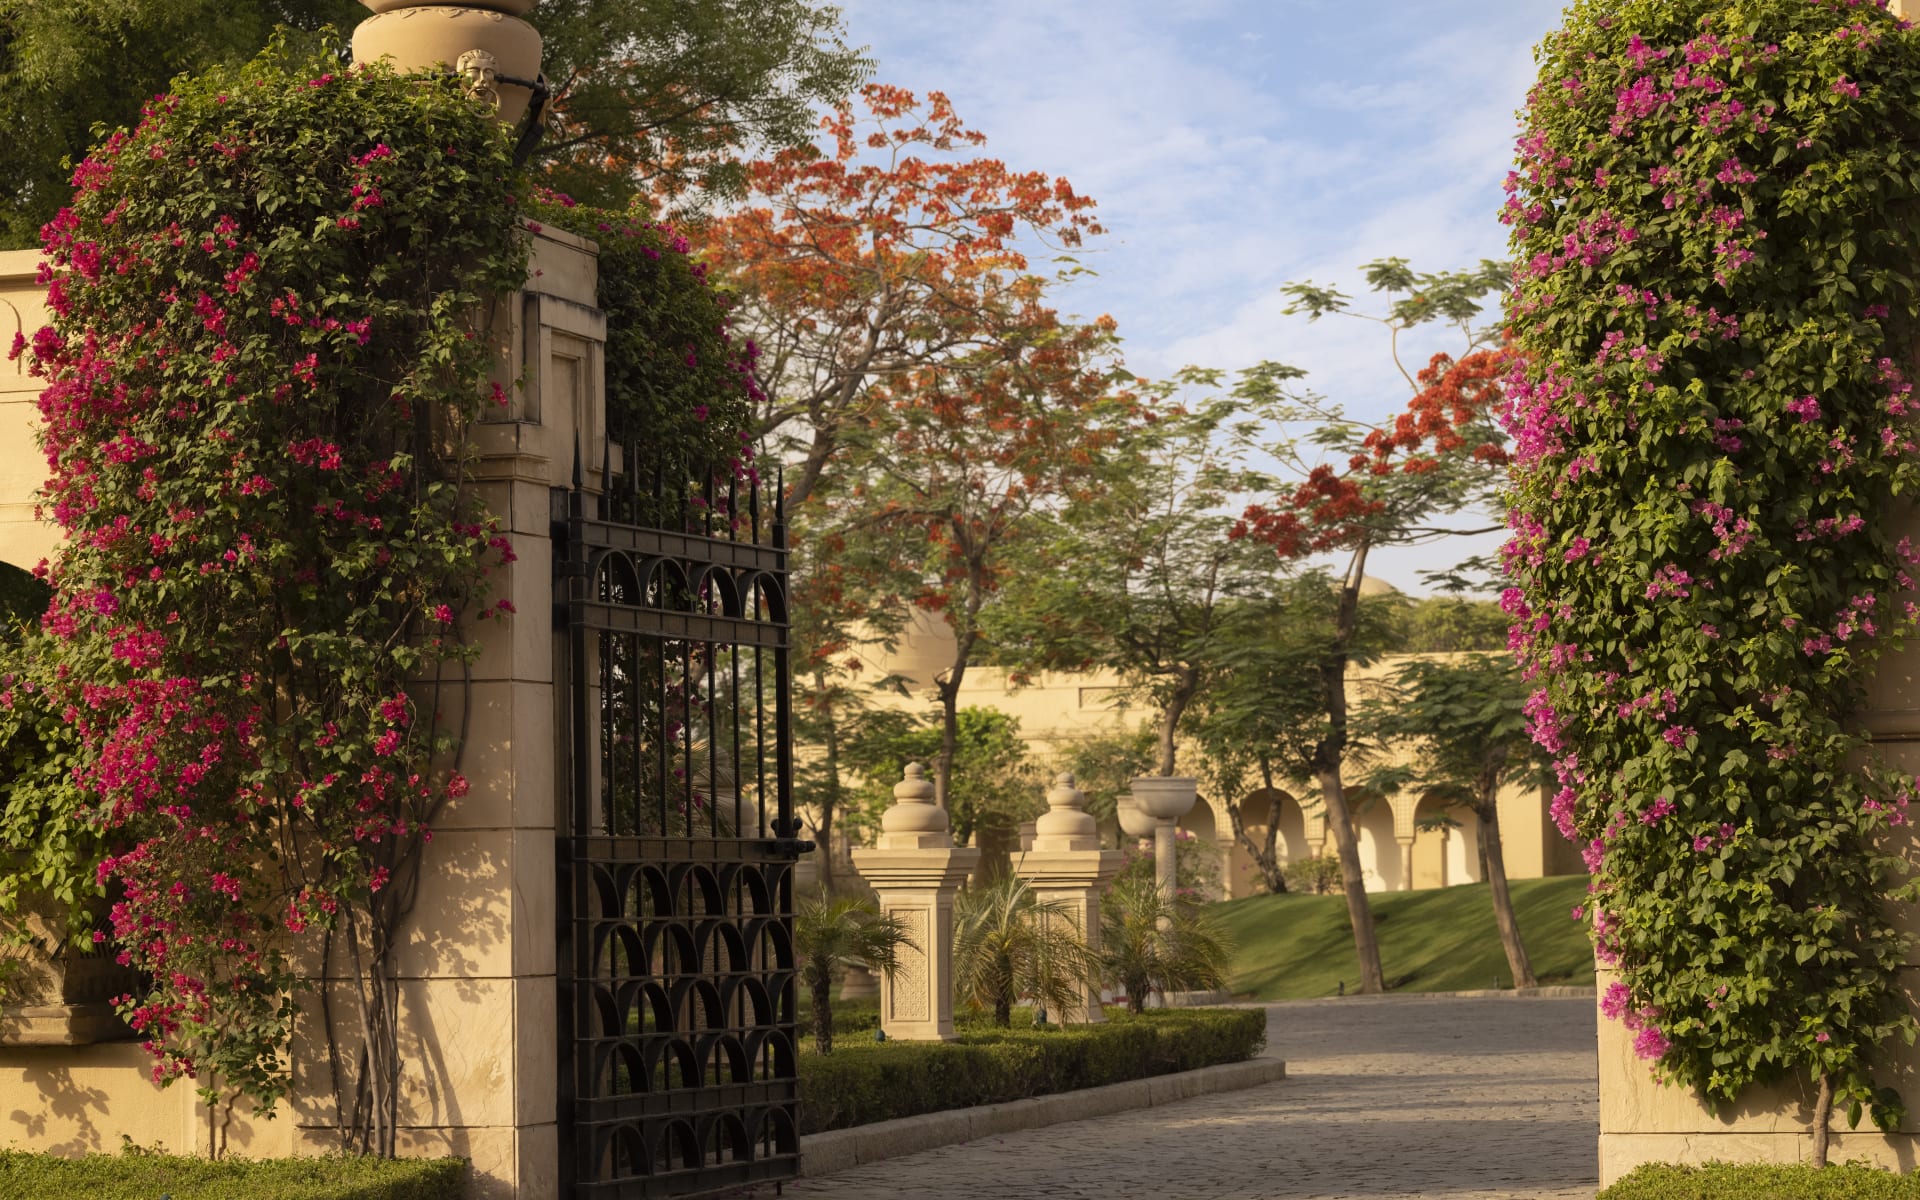 The_Oberoi_Amarvilas_Entrance_Gate_gbf9h9